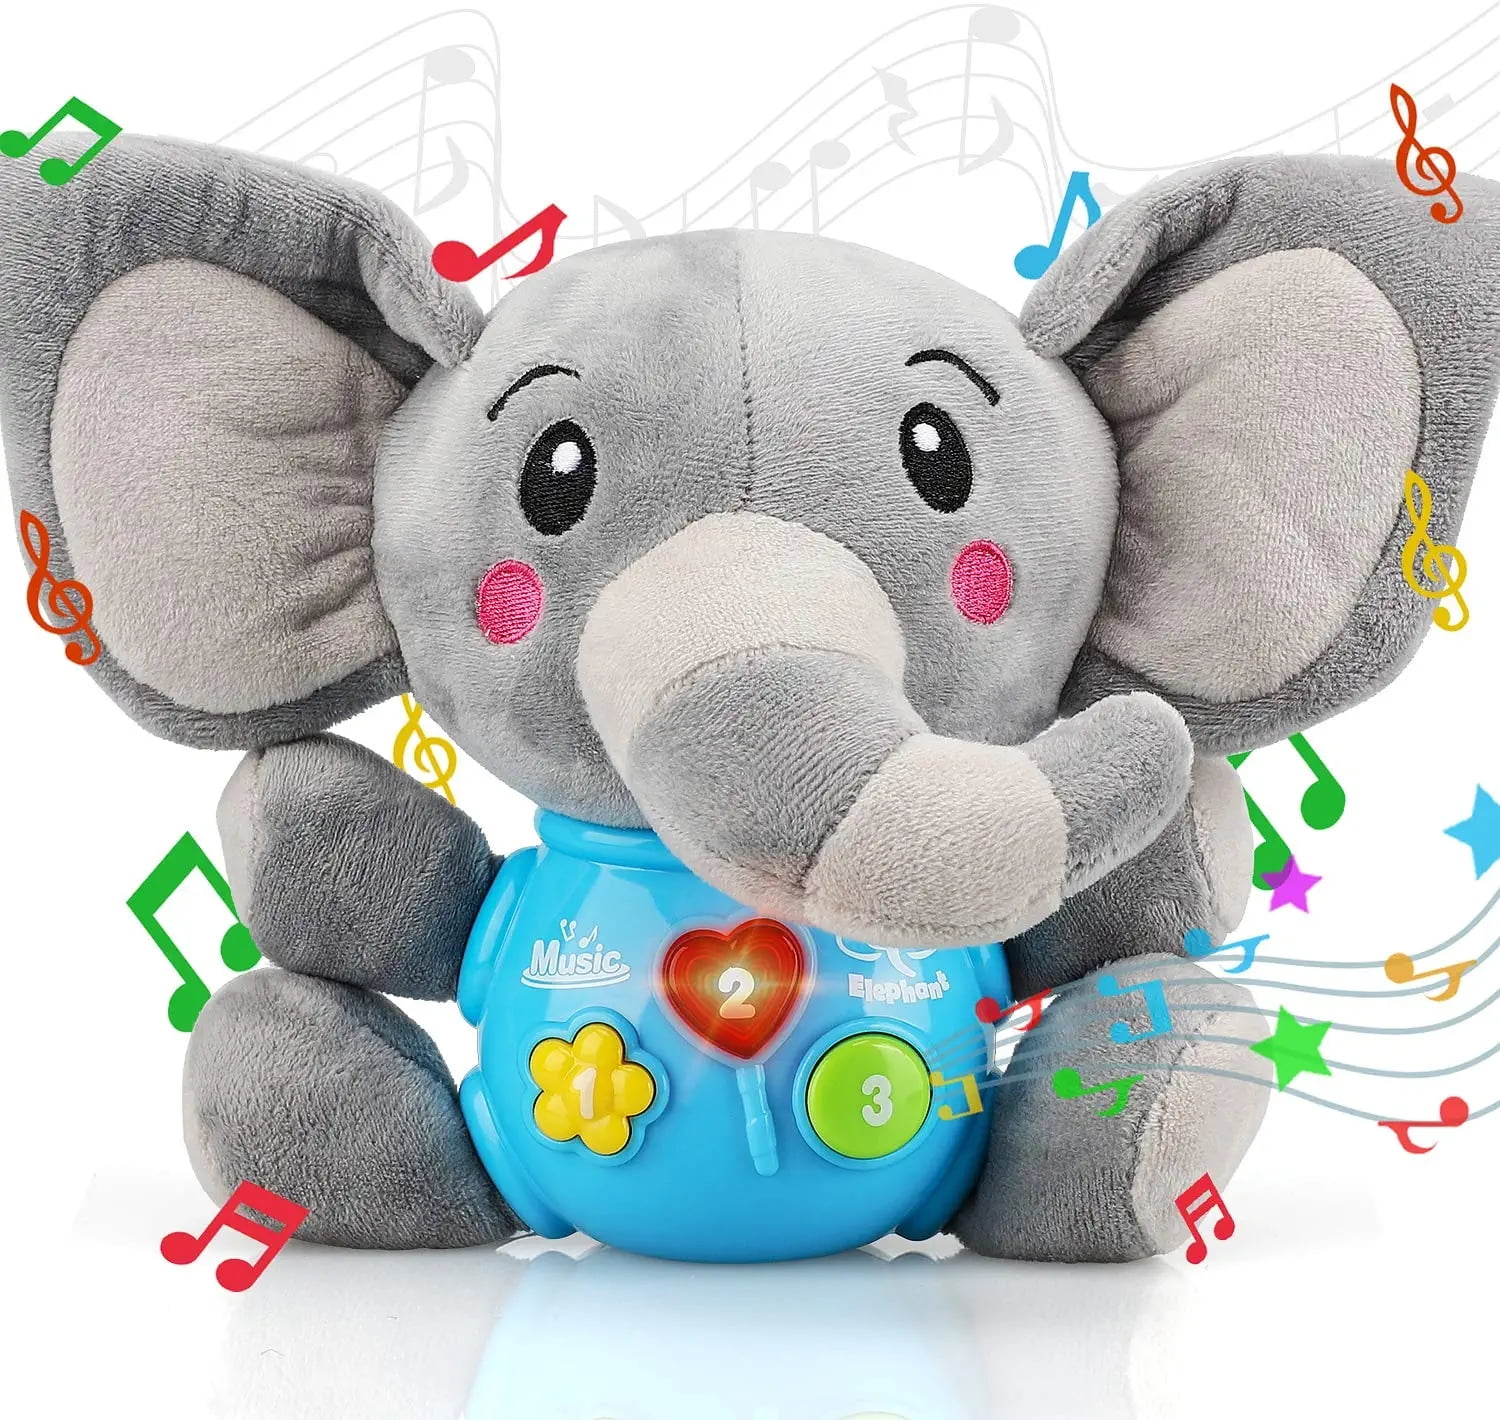 Baby Toys 0-12 Months Music Elephant Plush With Lights For Newborn Baby ...